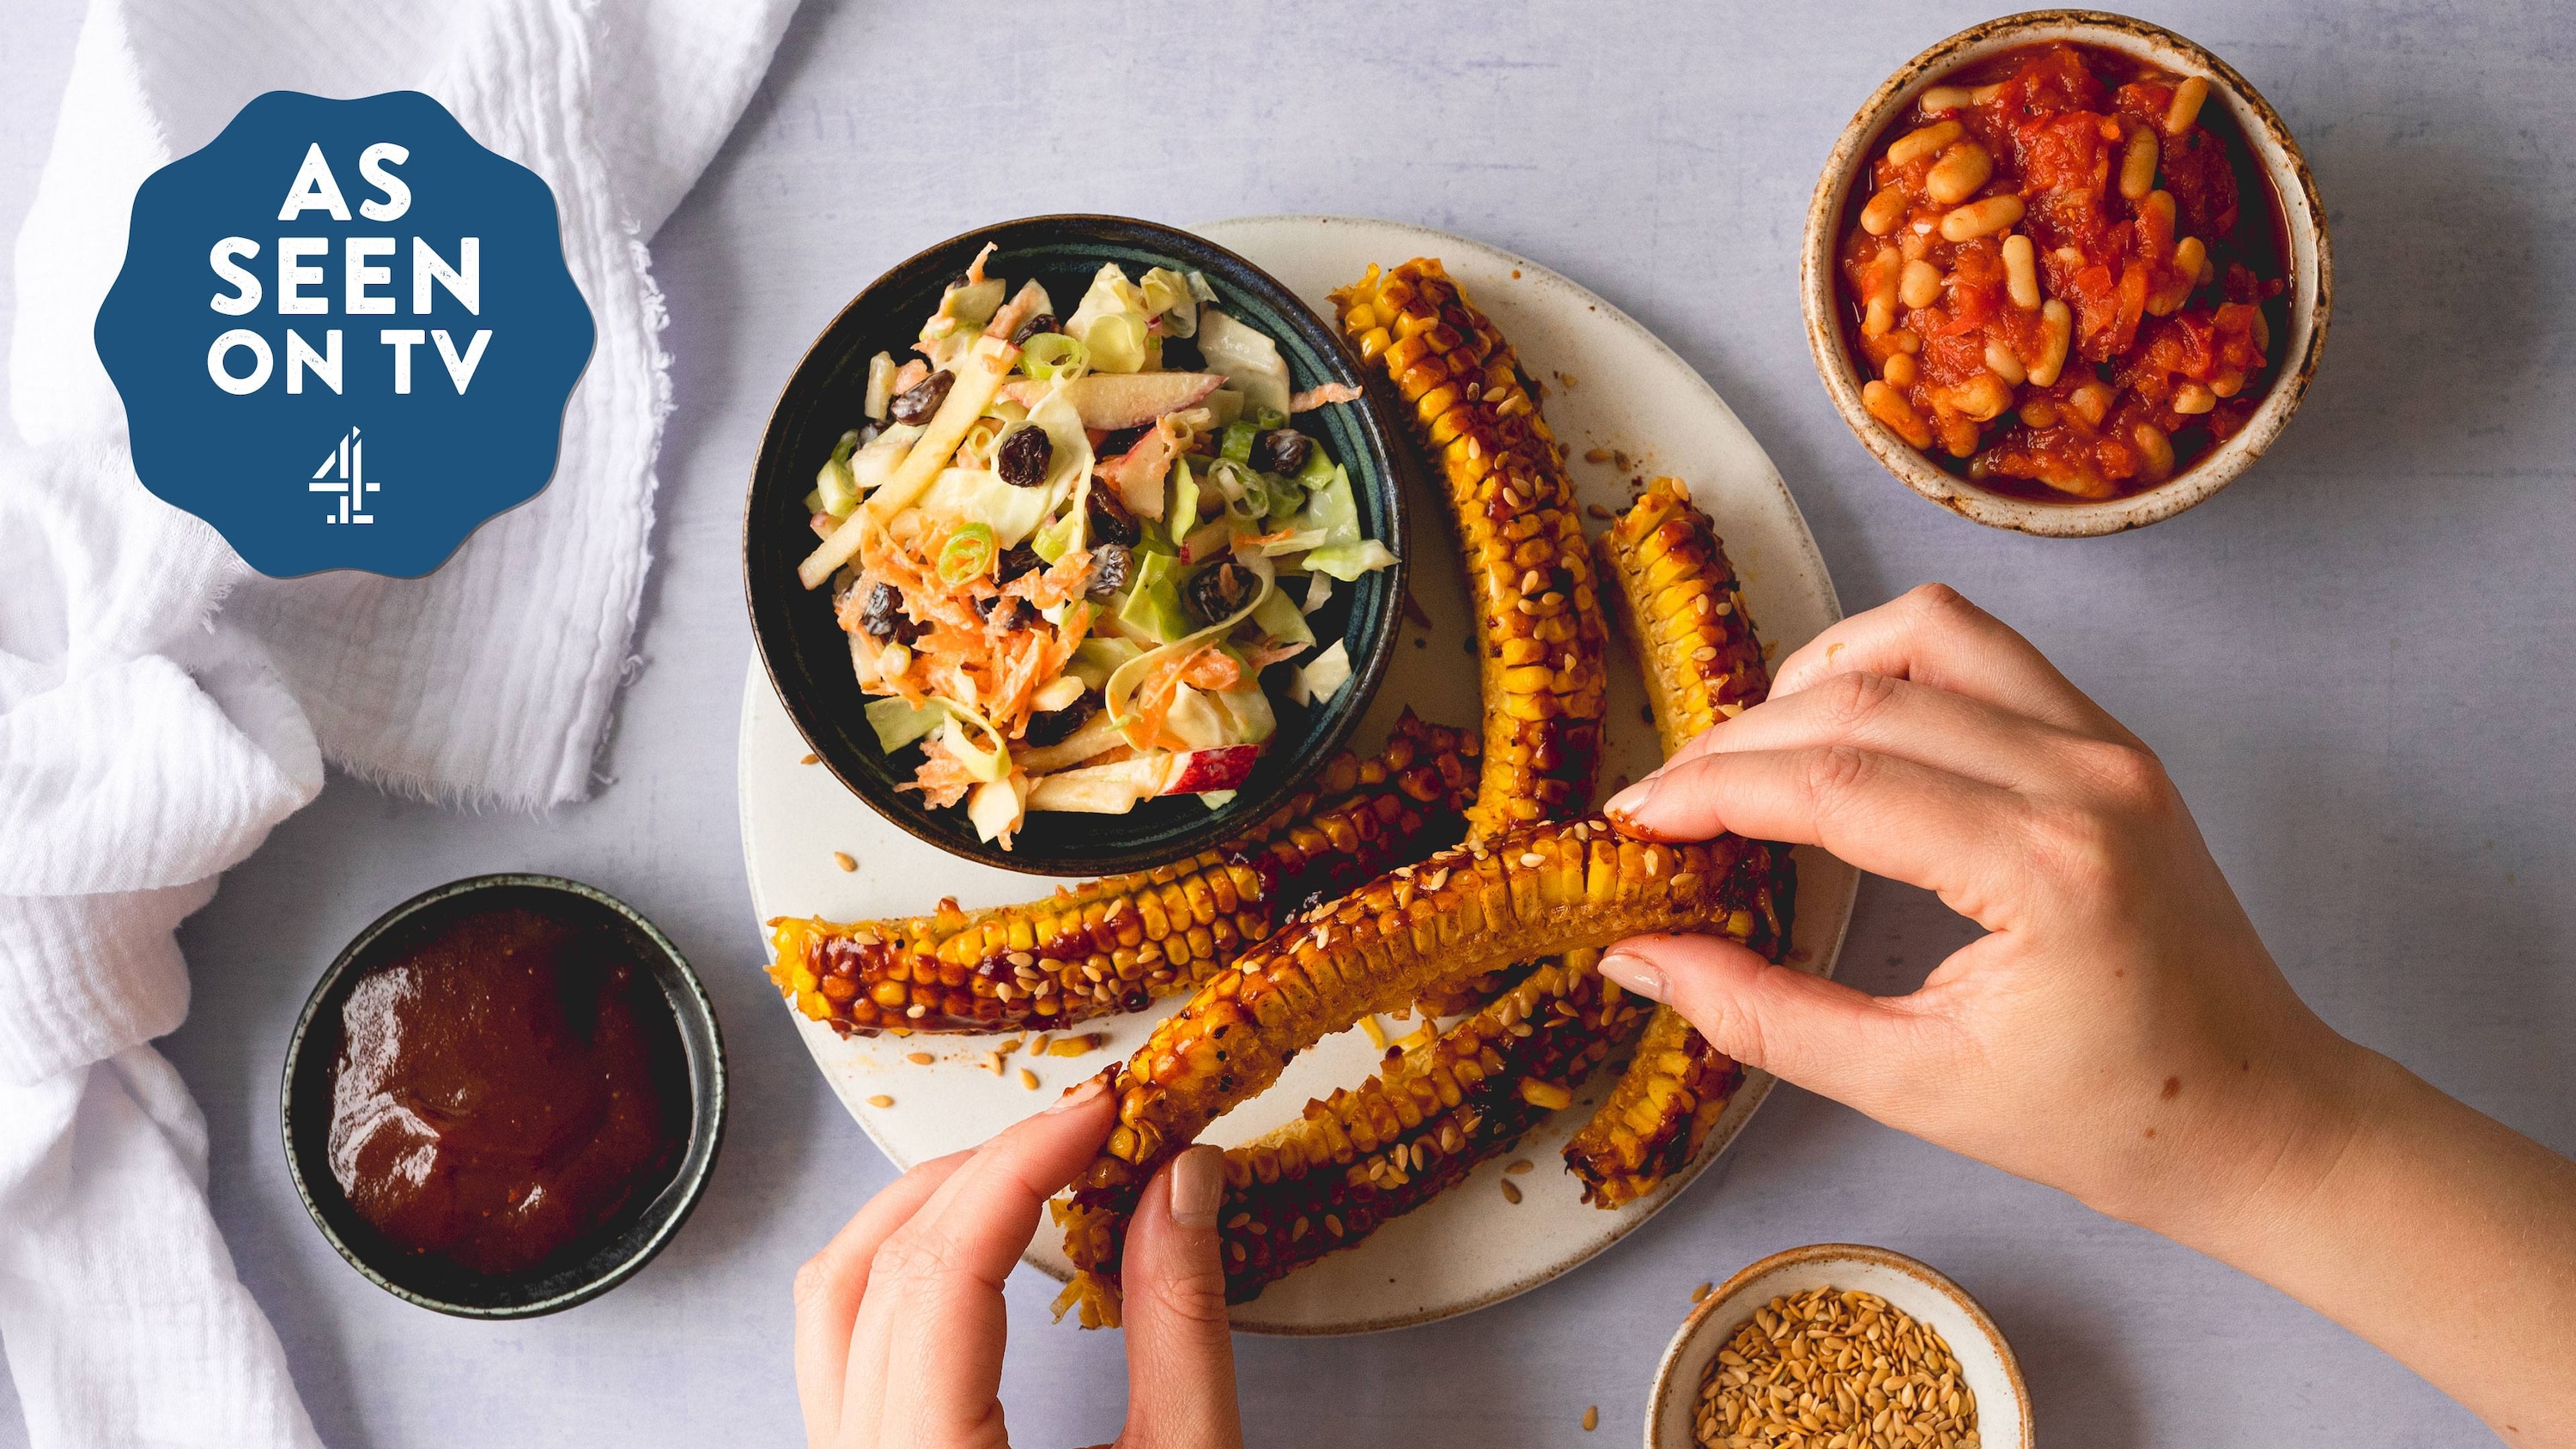 Corn ribs with vegan beans and apple ‘slaw